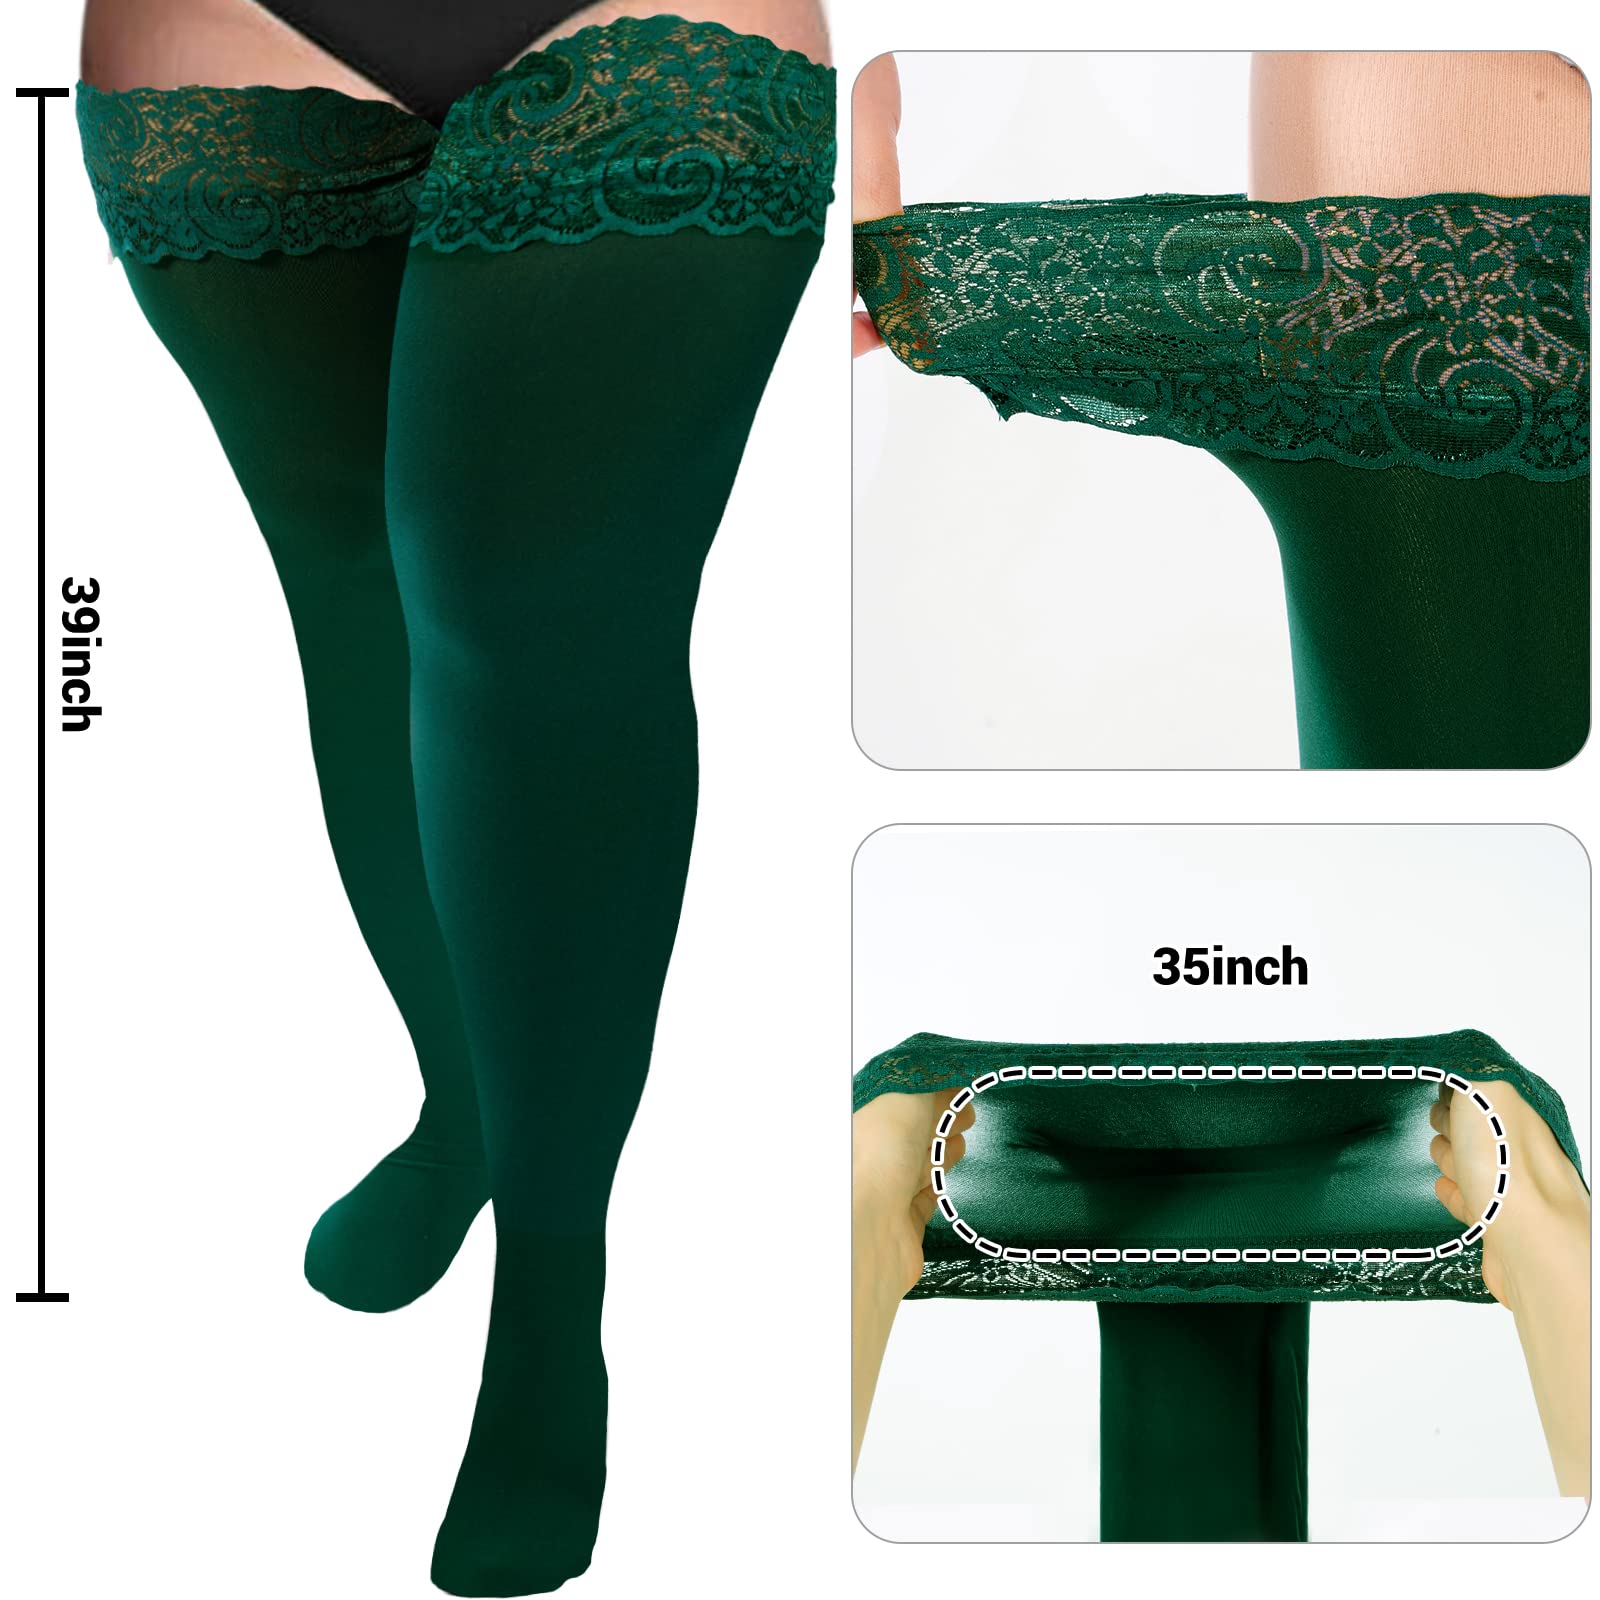 55d Semi Sheer Silicone Lace Stay Up Thigh Highs Moon Wood